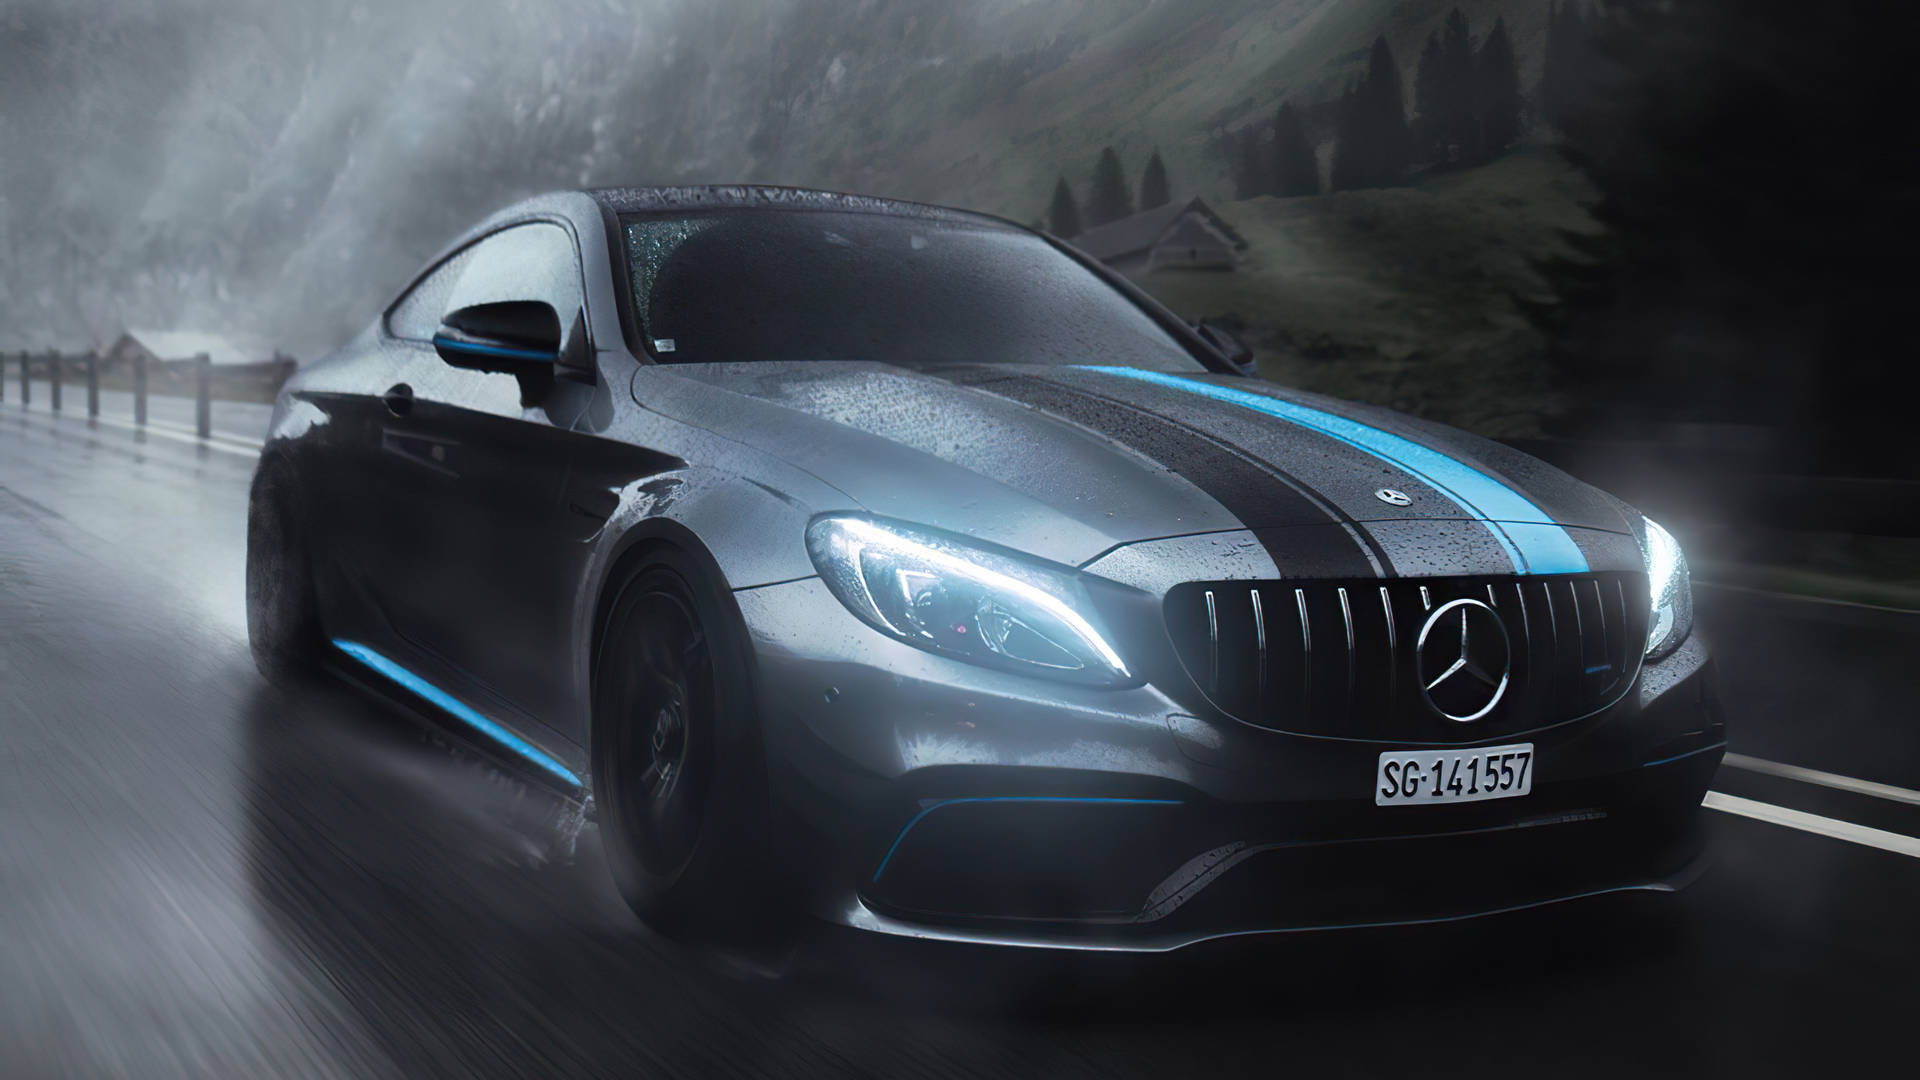 Free Benz 4k Wallpaper Downloads, [100+] Benz 4k Wallpapers for FREE |  